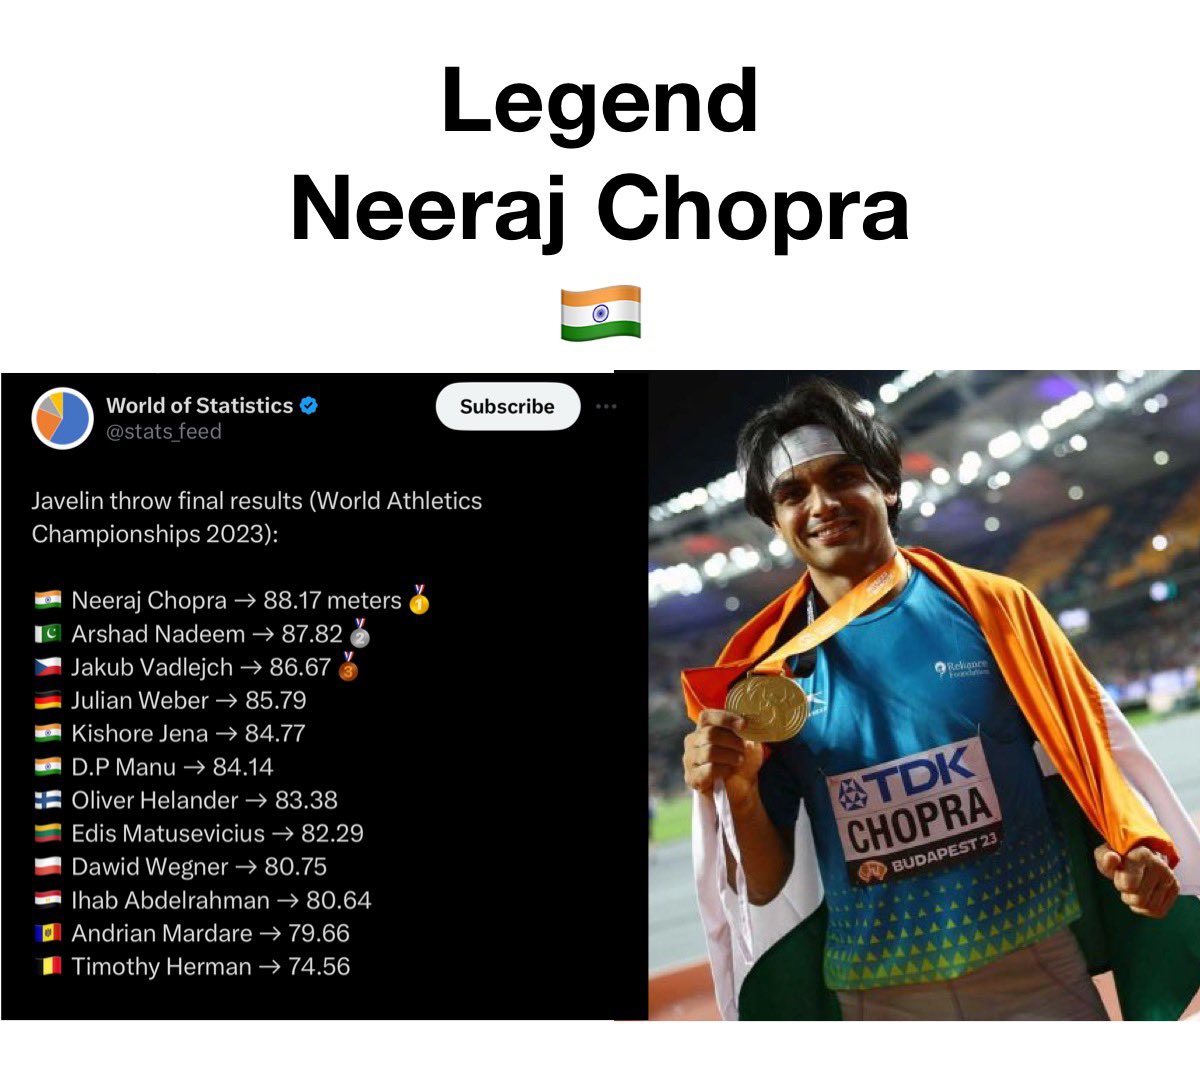 Neeraj Chopra created history and became the first Indian to win Gold at World Athletics Championships. 🔥🫡

#NeerajChopra #WorldAthleticsChampionship #WorldAthleticsChampionships2023 #WorldAthleticsChamps 
#JavelinThrow